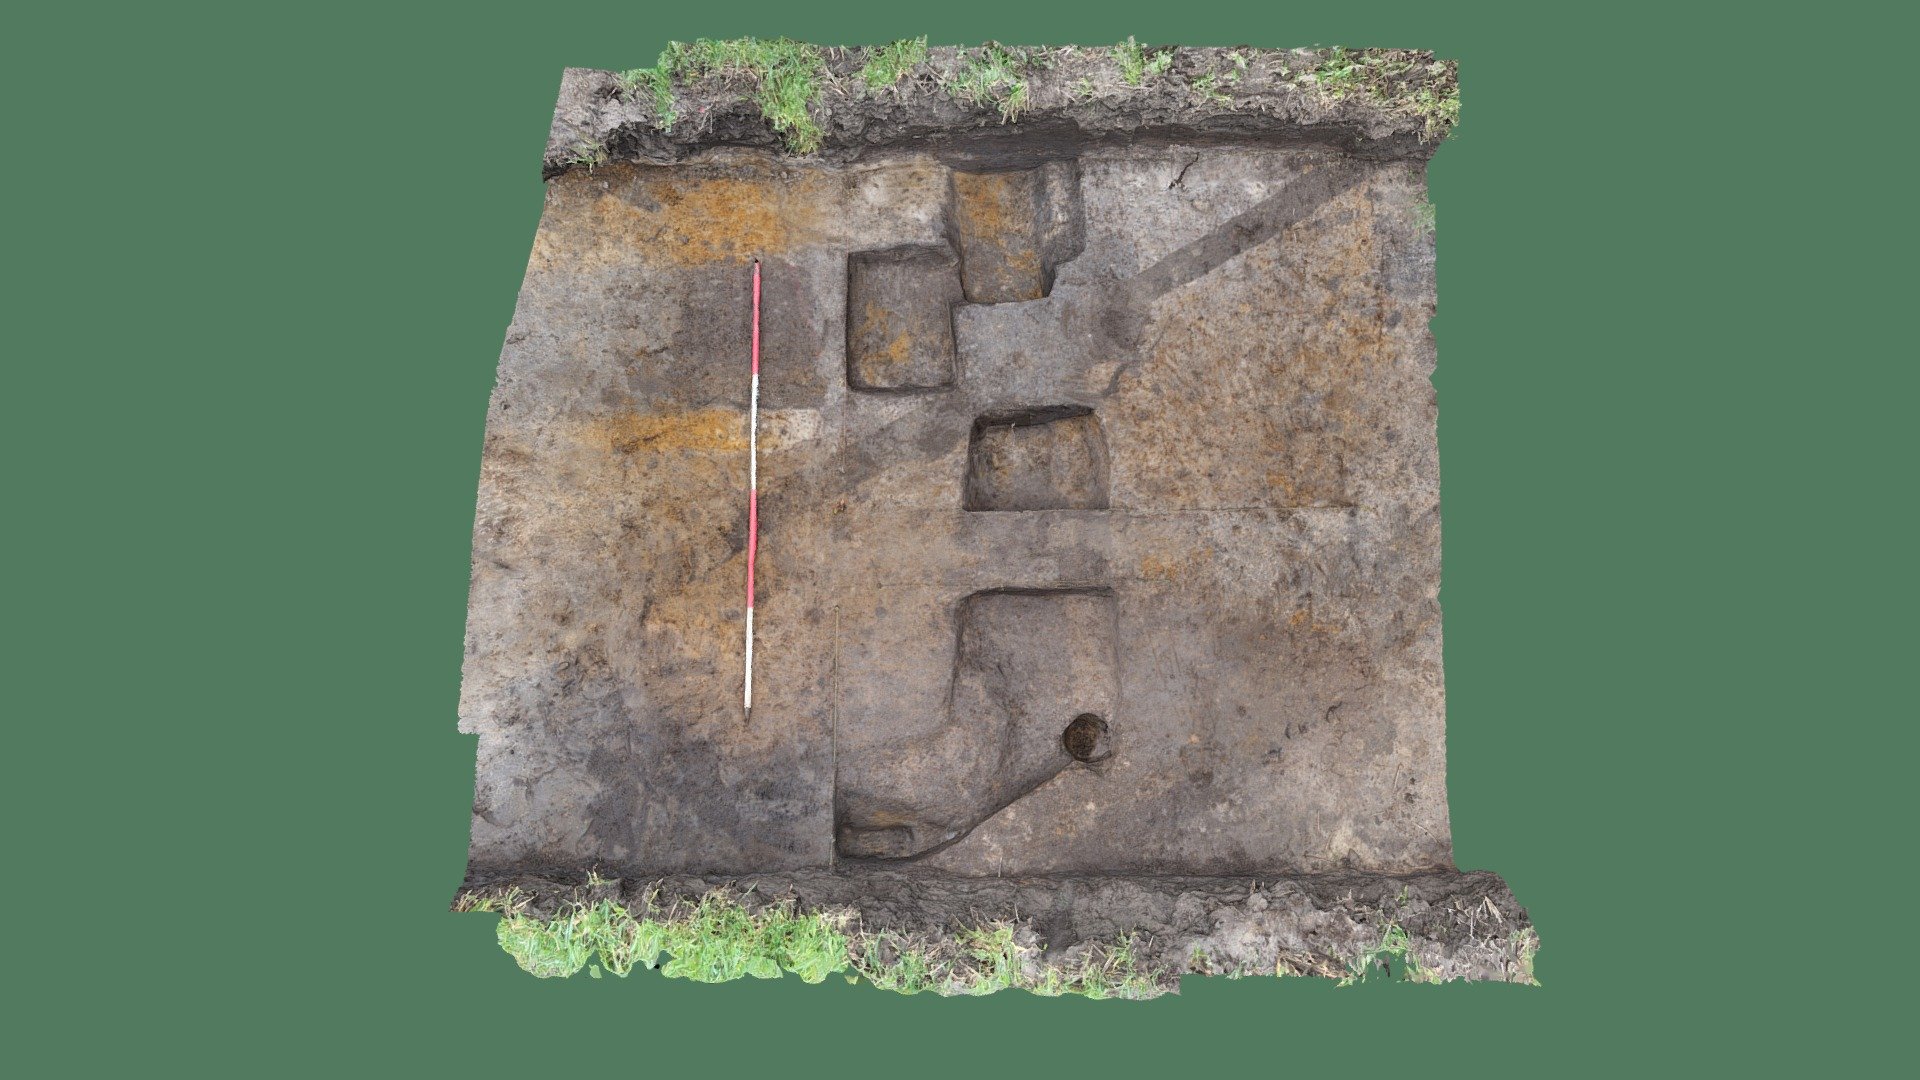 CAW2019 Trench 5 - Central Features